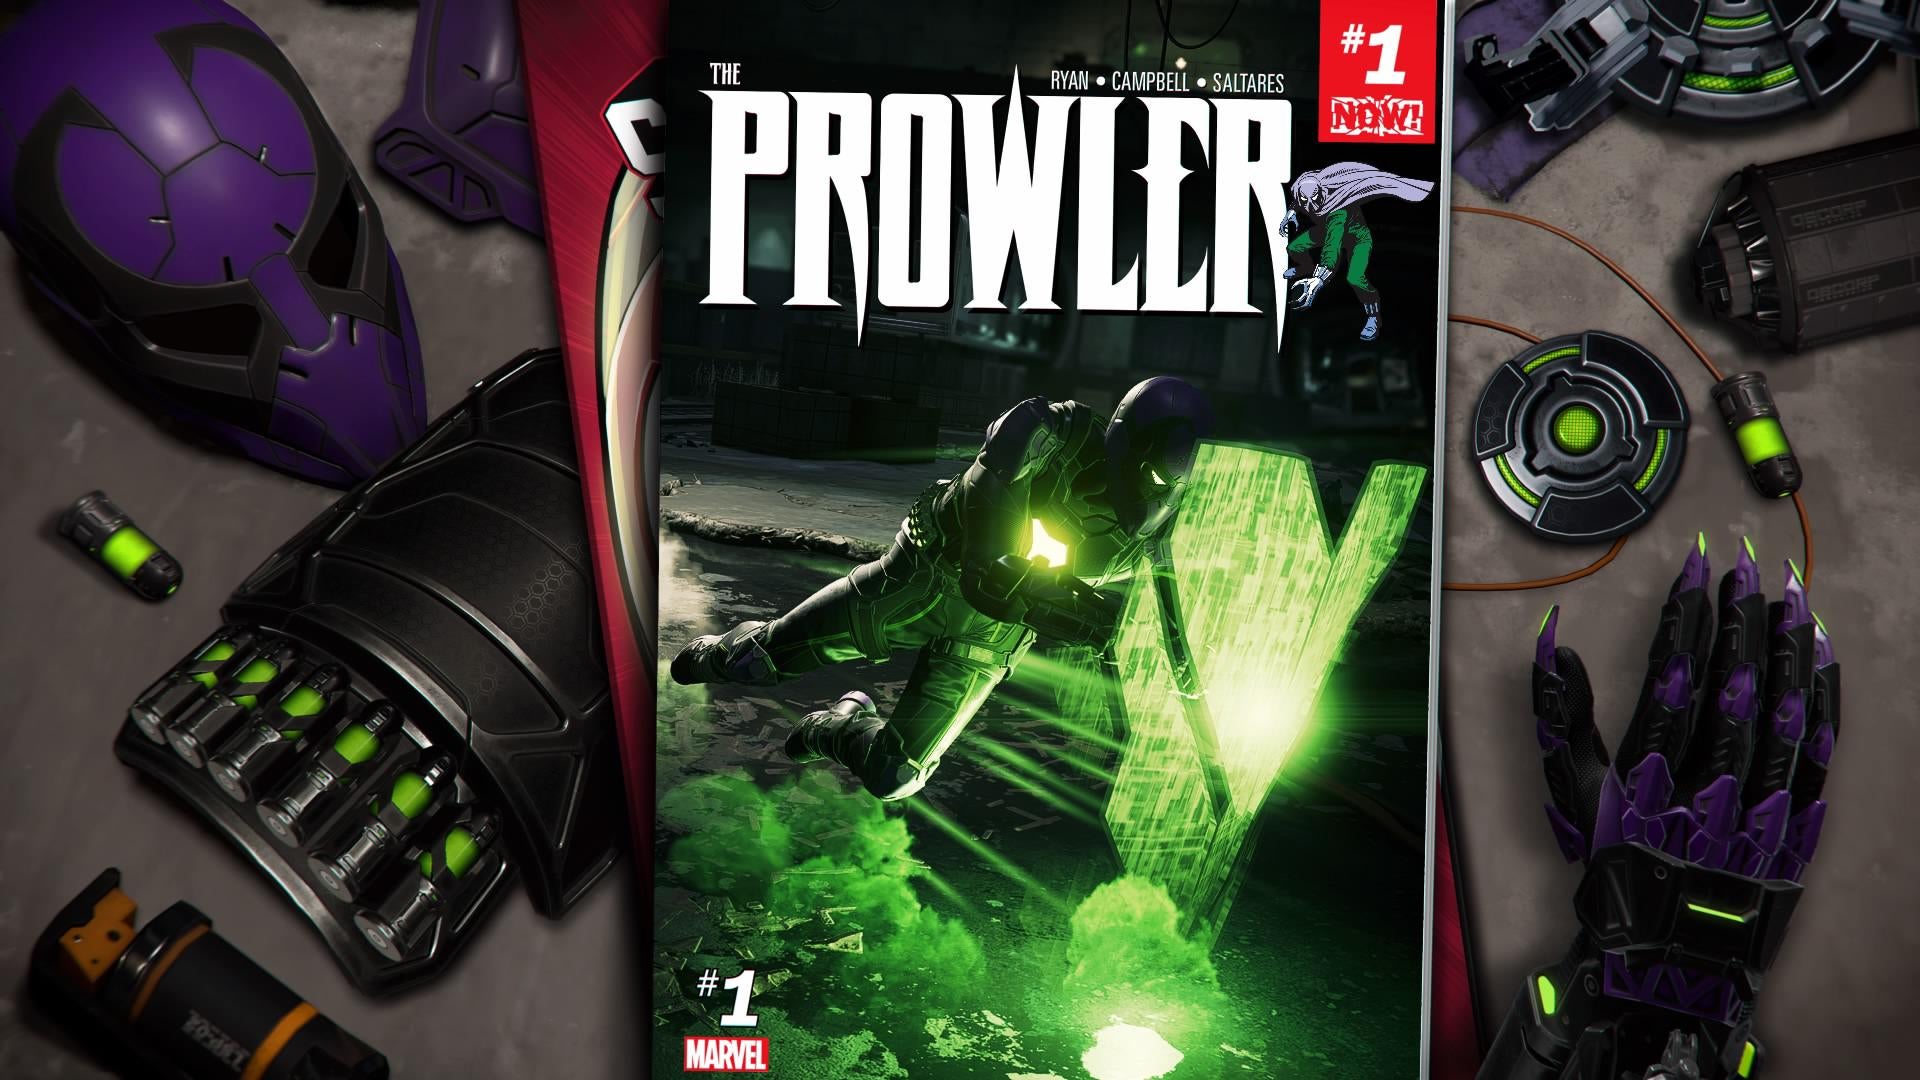 You” Impresses Fans With Fourth Season – THE PROWLER